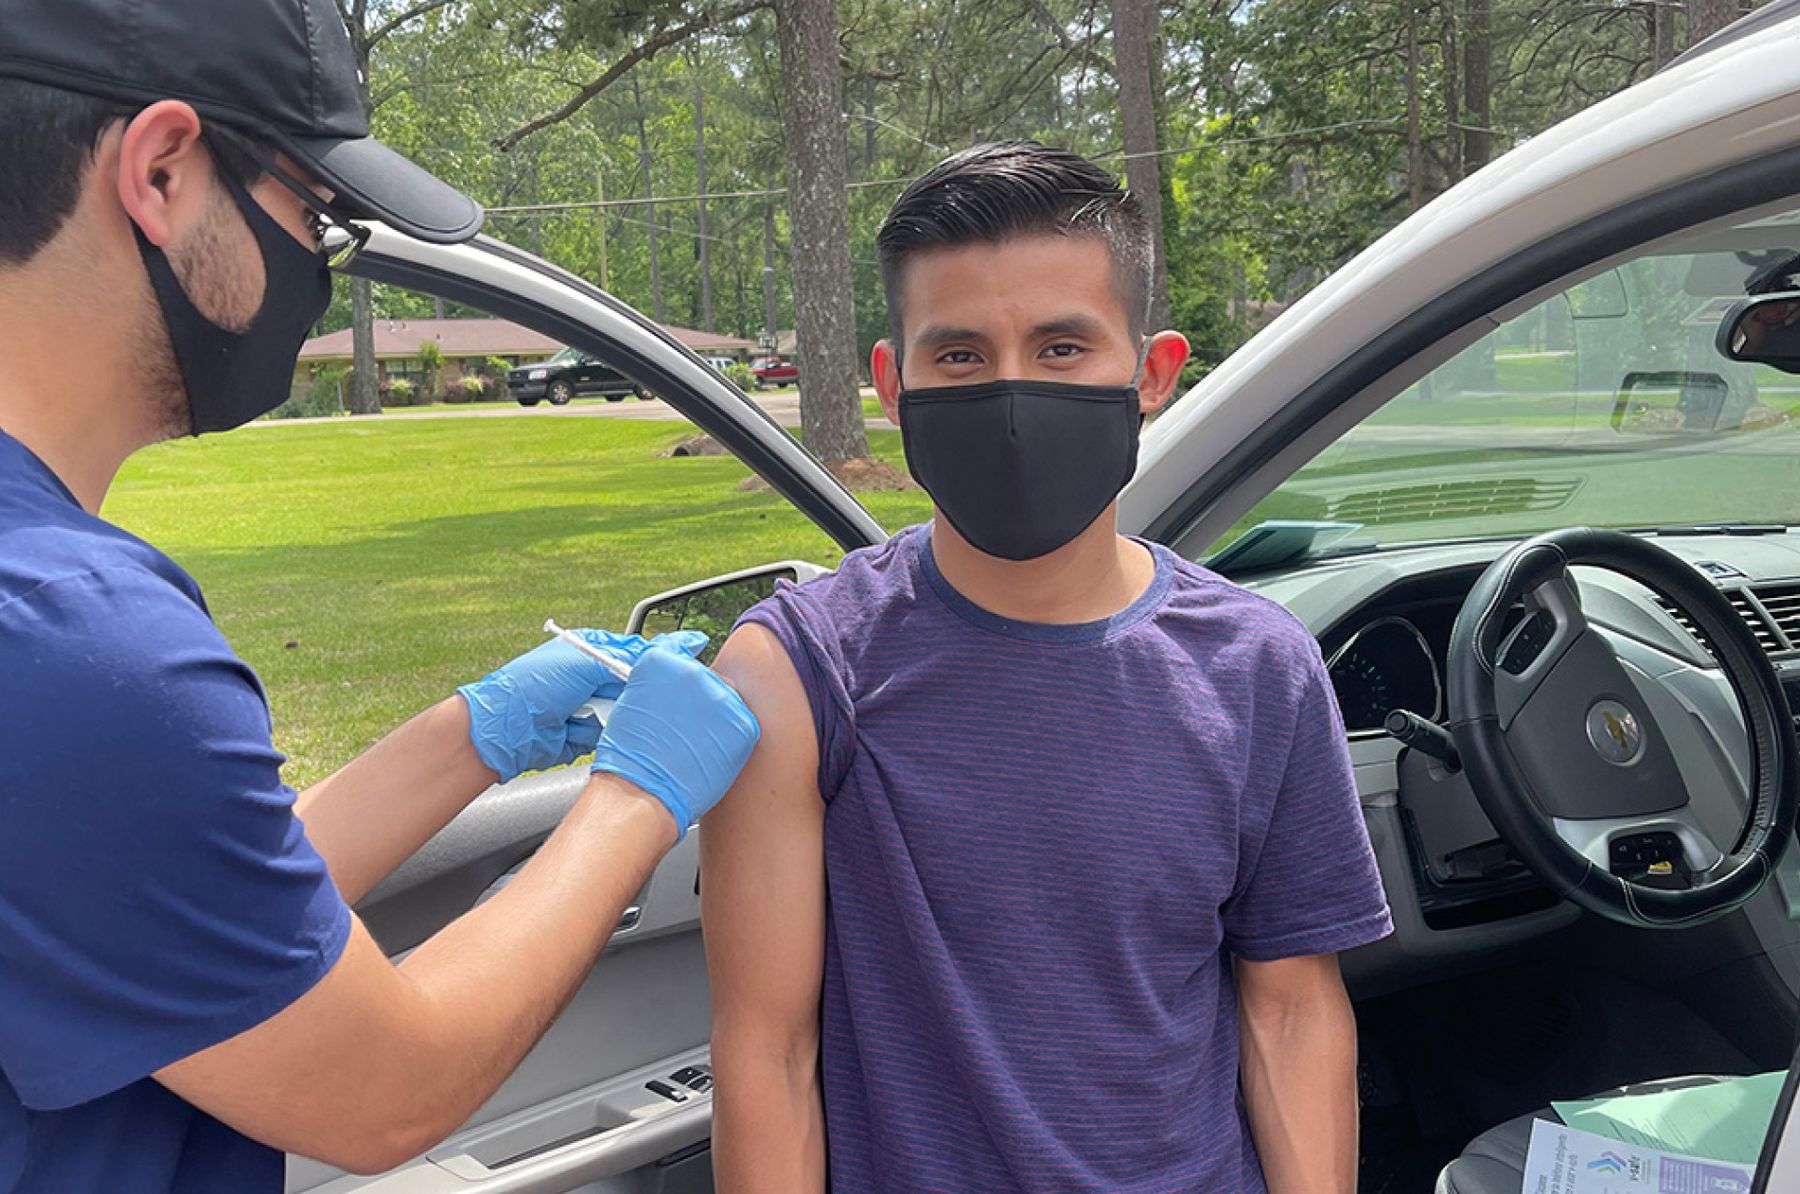 Masked teenage boy stands by a car while receiving a vaccine in his arm from a masked provider.